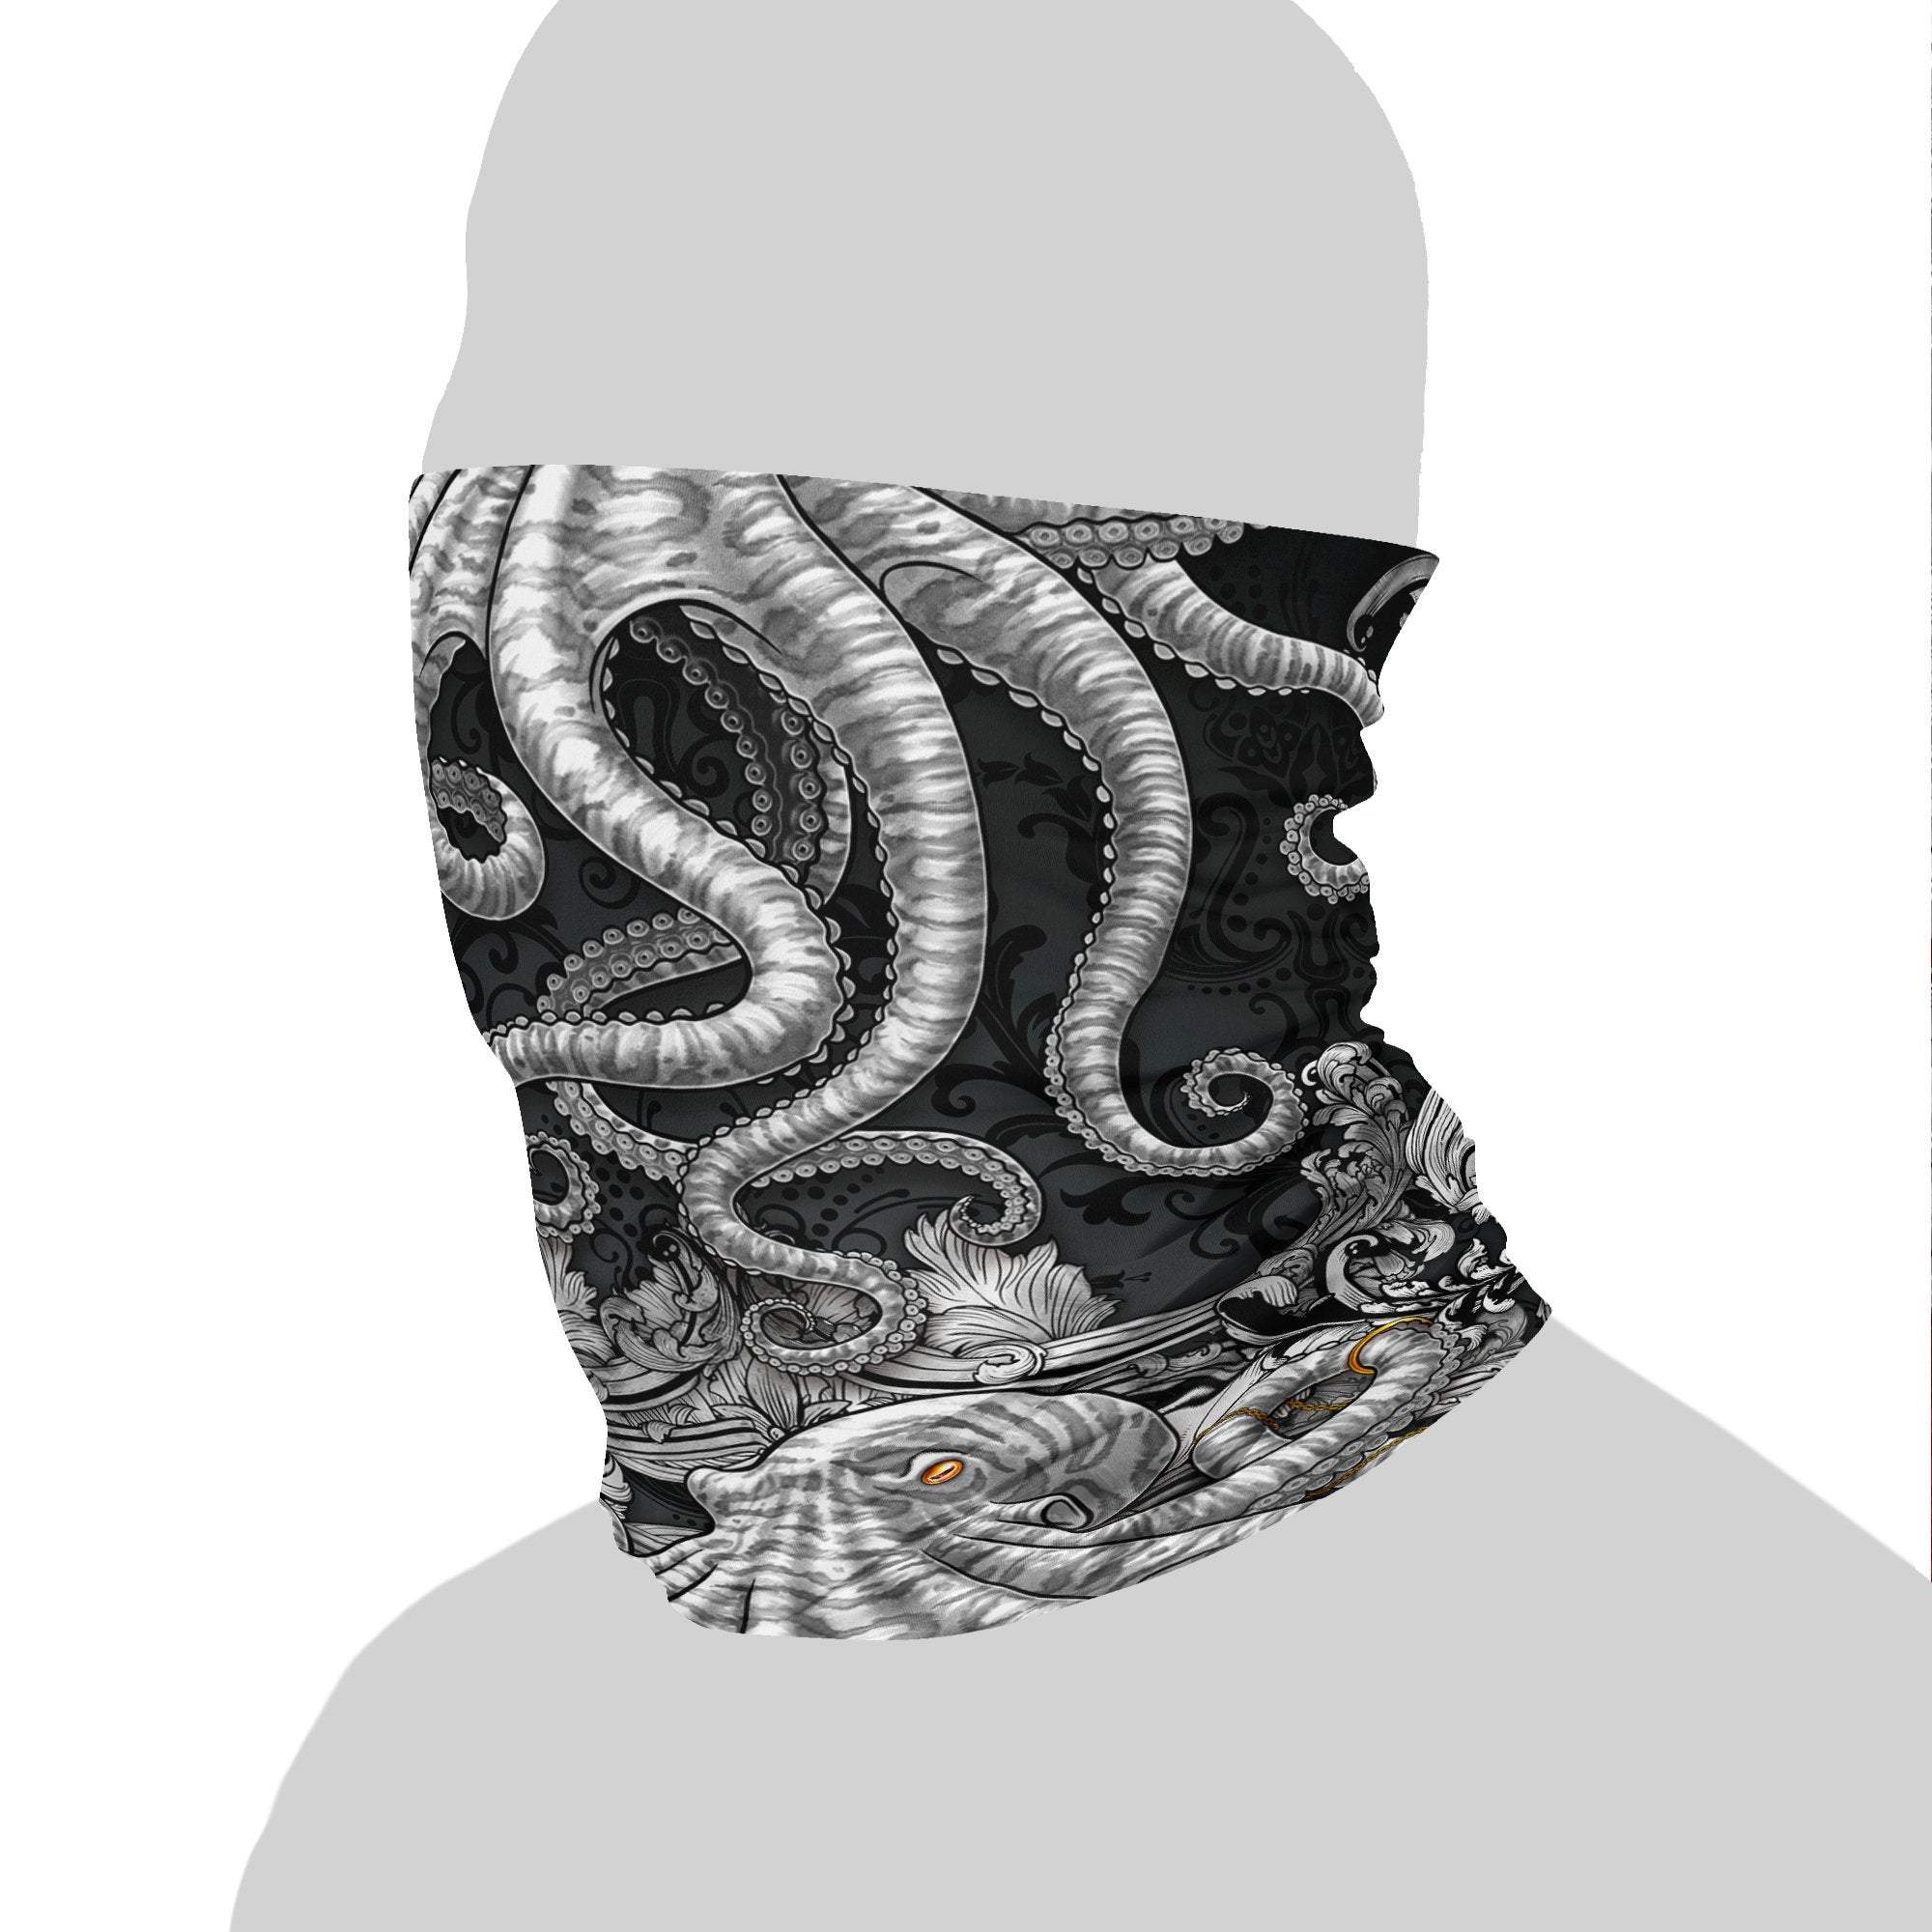 Tentacles Neck Gaiter, Face Mask, Head Covering, Octopus, Indie Outfit - Silver & Black - Abysm Internal